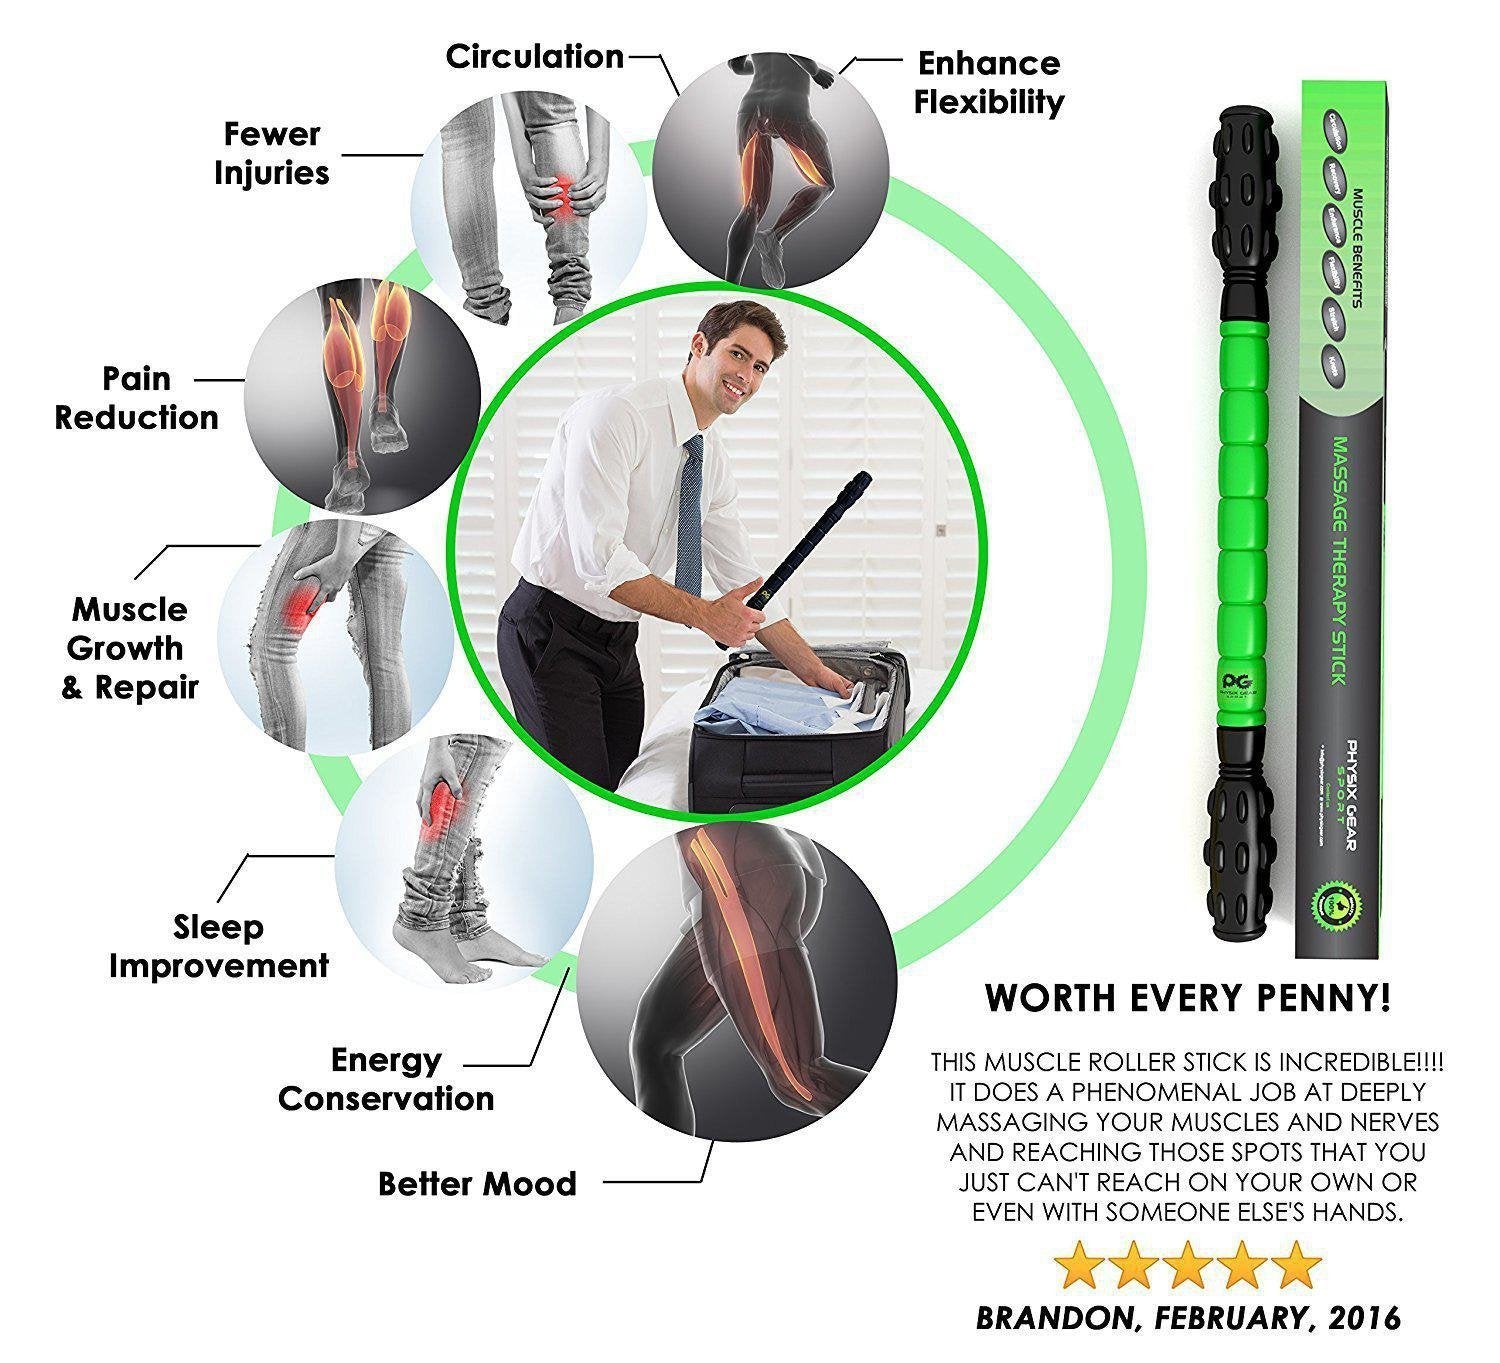 Buy The Best Massage Roller To Strengthen Your Muscles and Flexibility-Physix Gear Sport